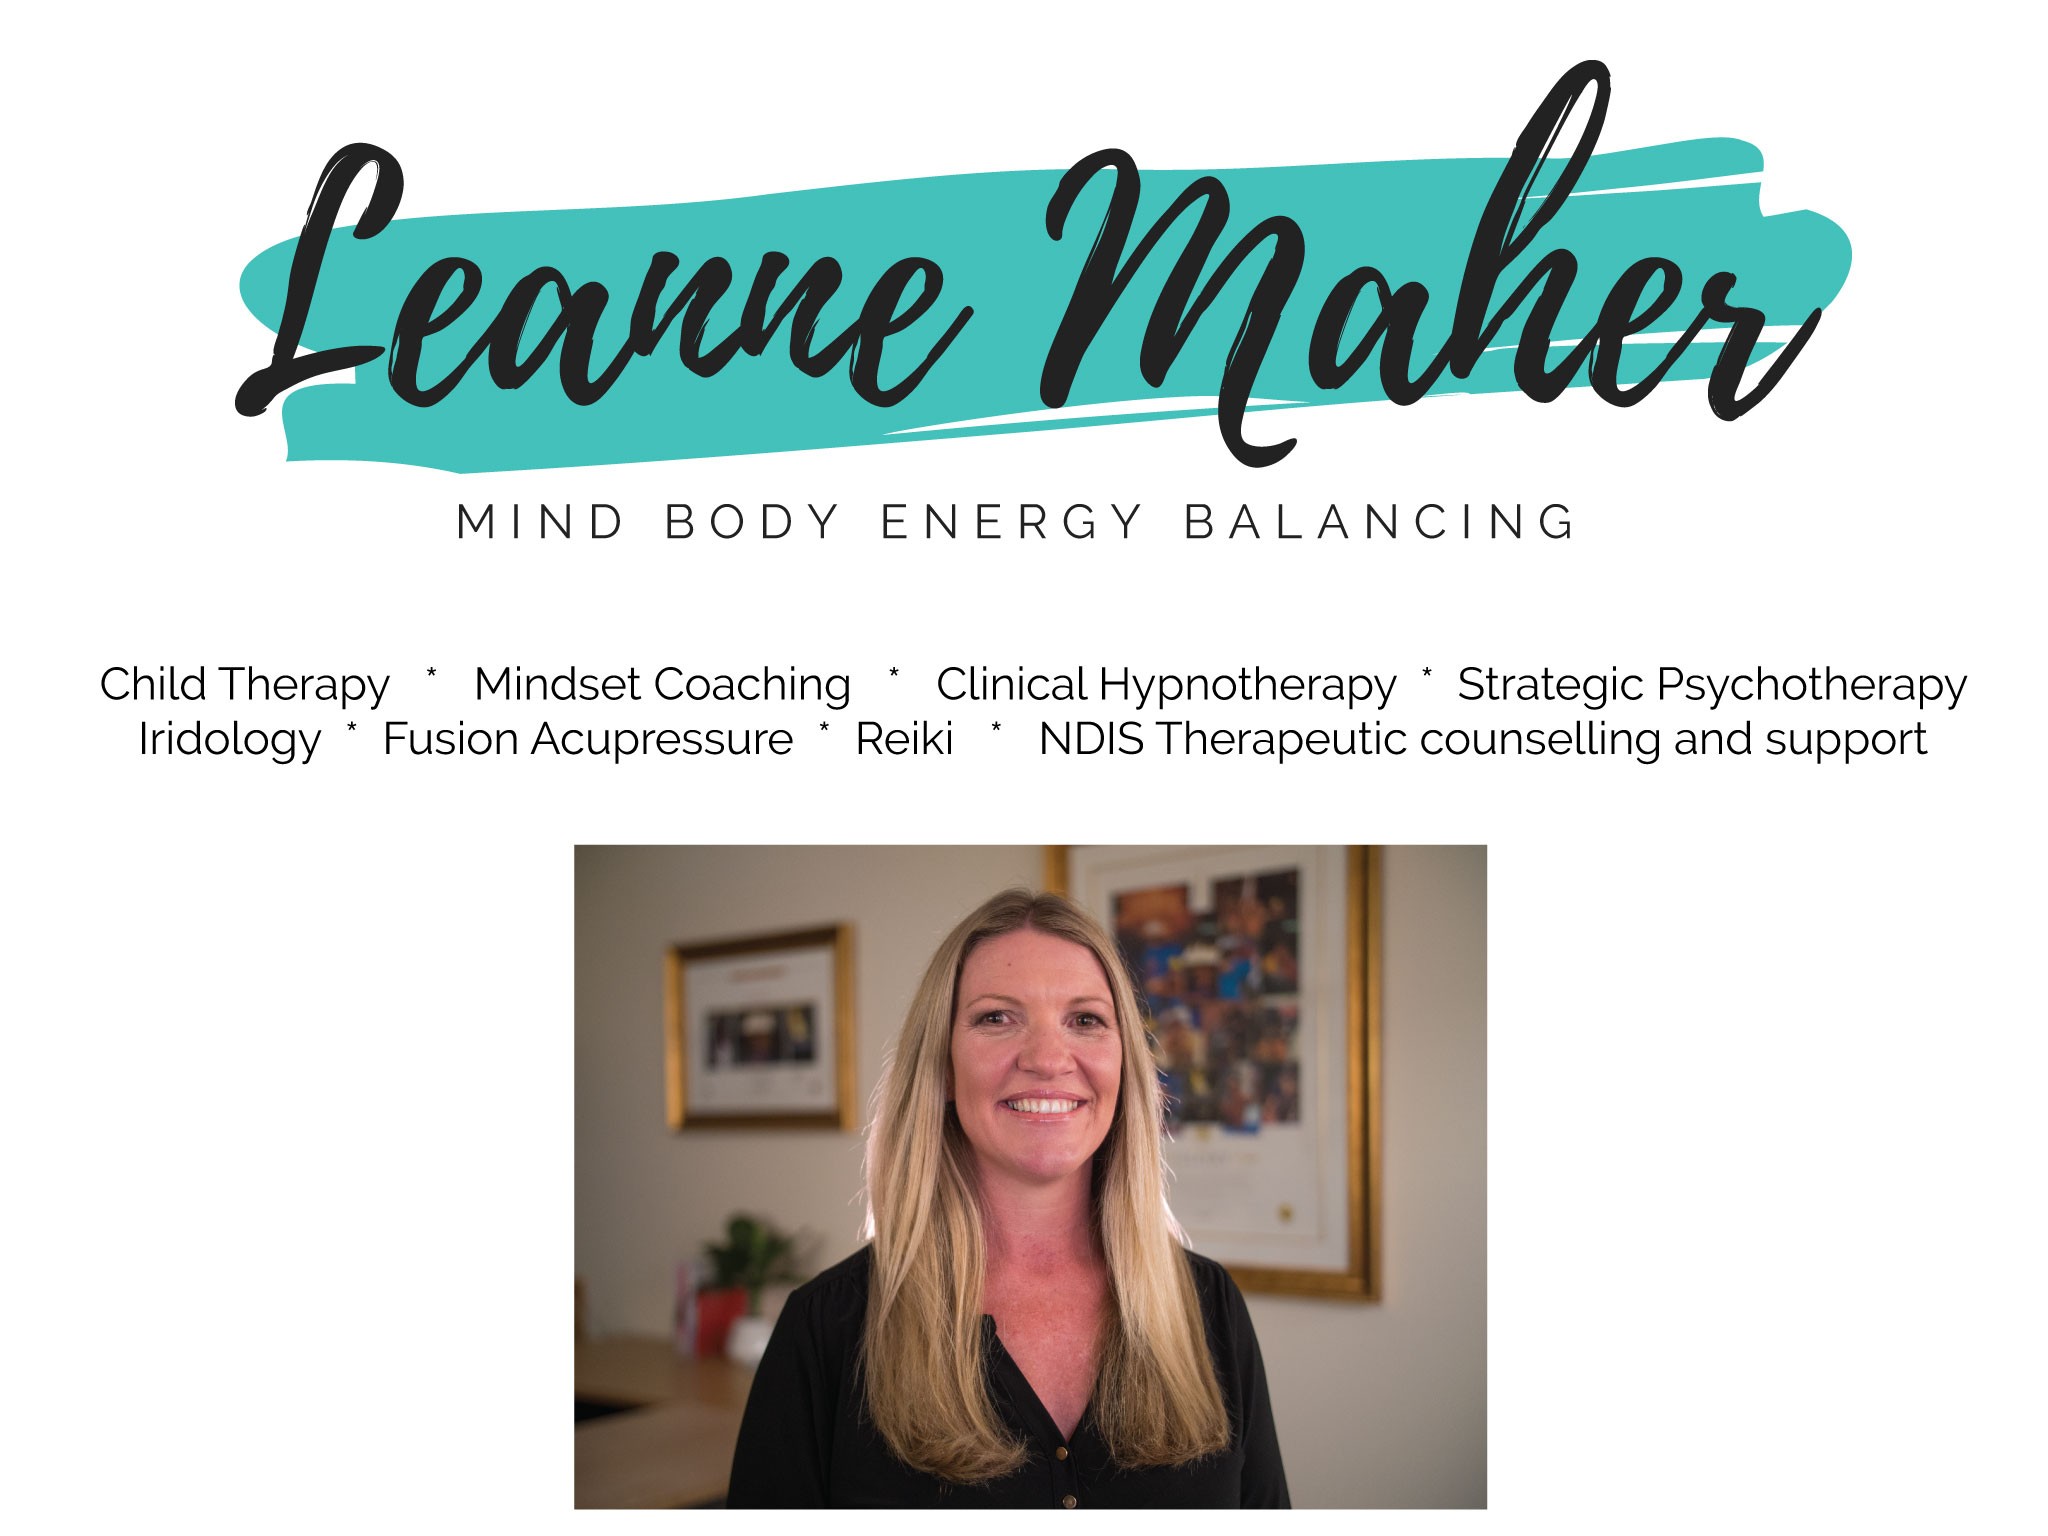 Leanne Maher therapist on Natural Therapy Pages